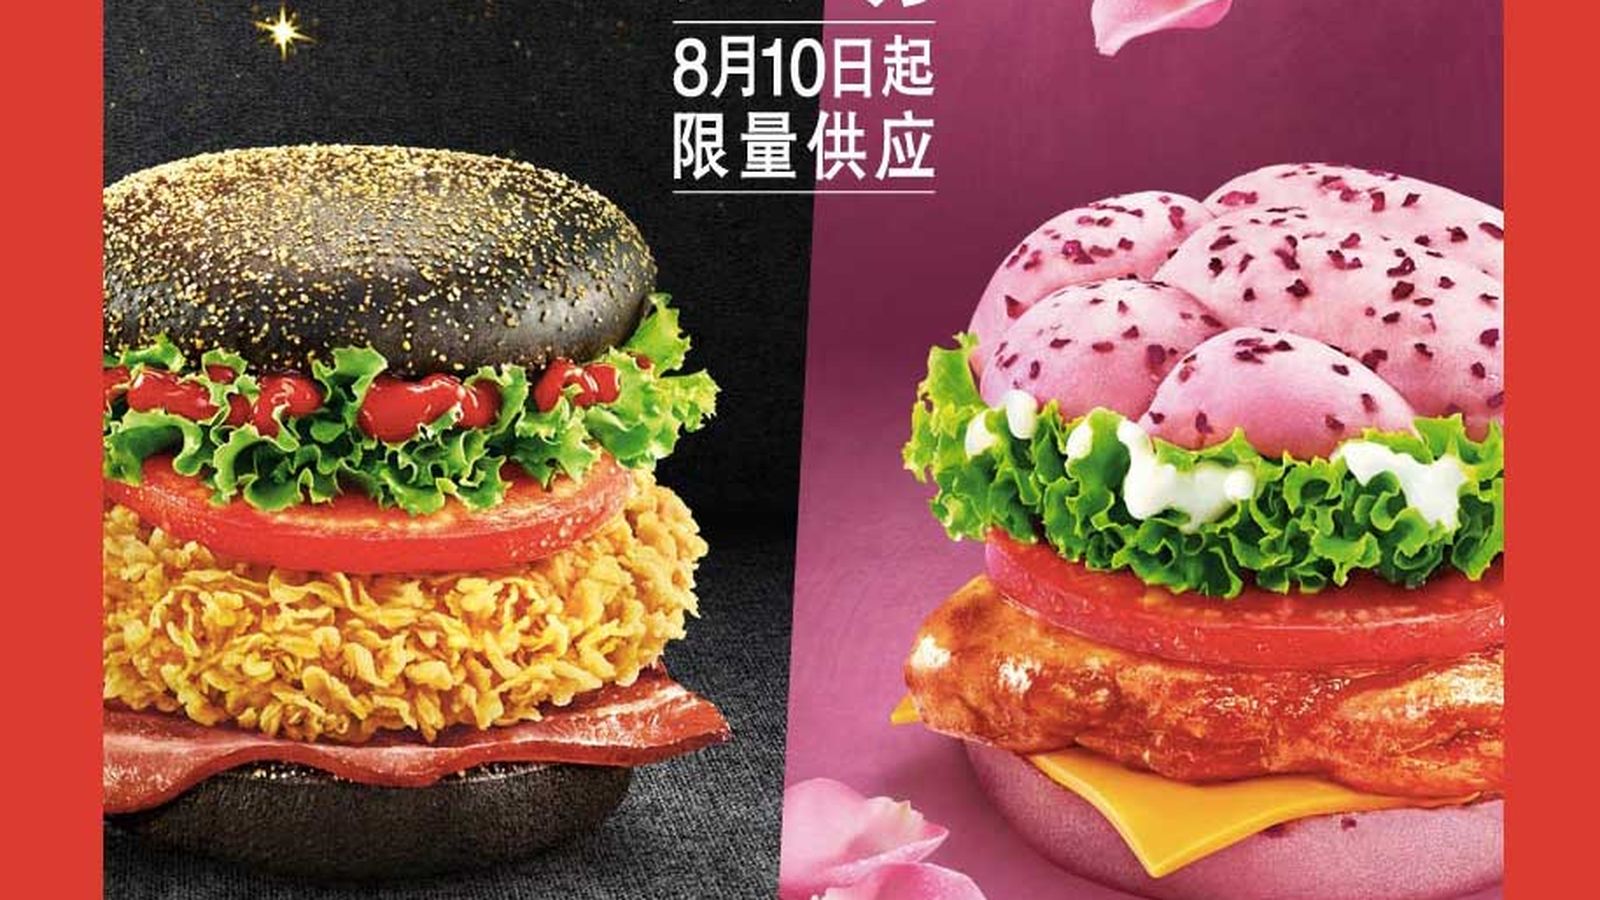 KFC (China) Black and Pink Burger hoping to boost the sales of burger chains in the country of china.